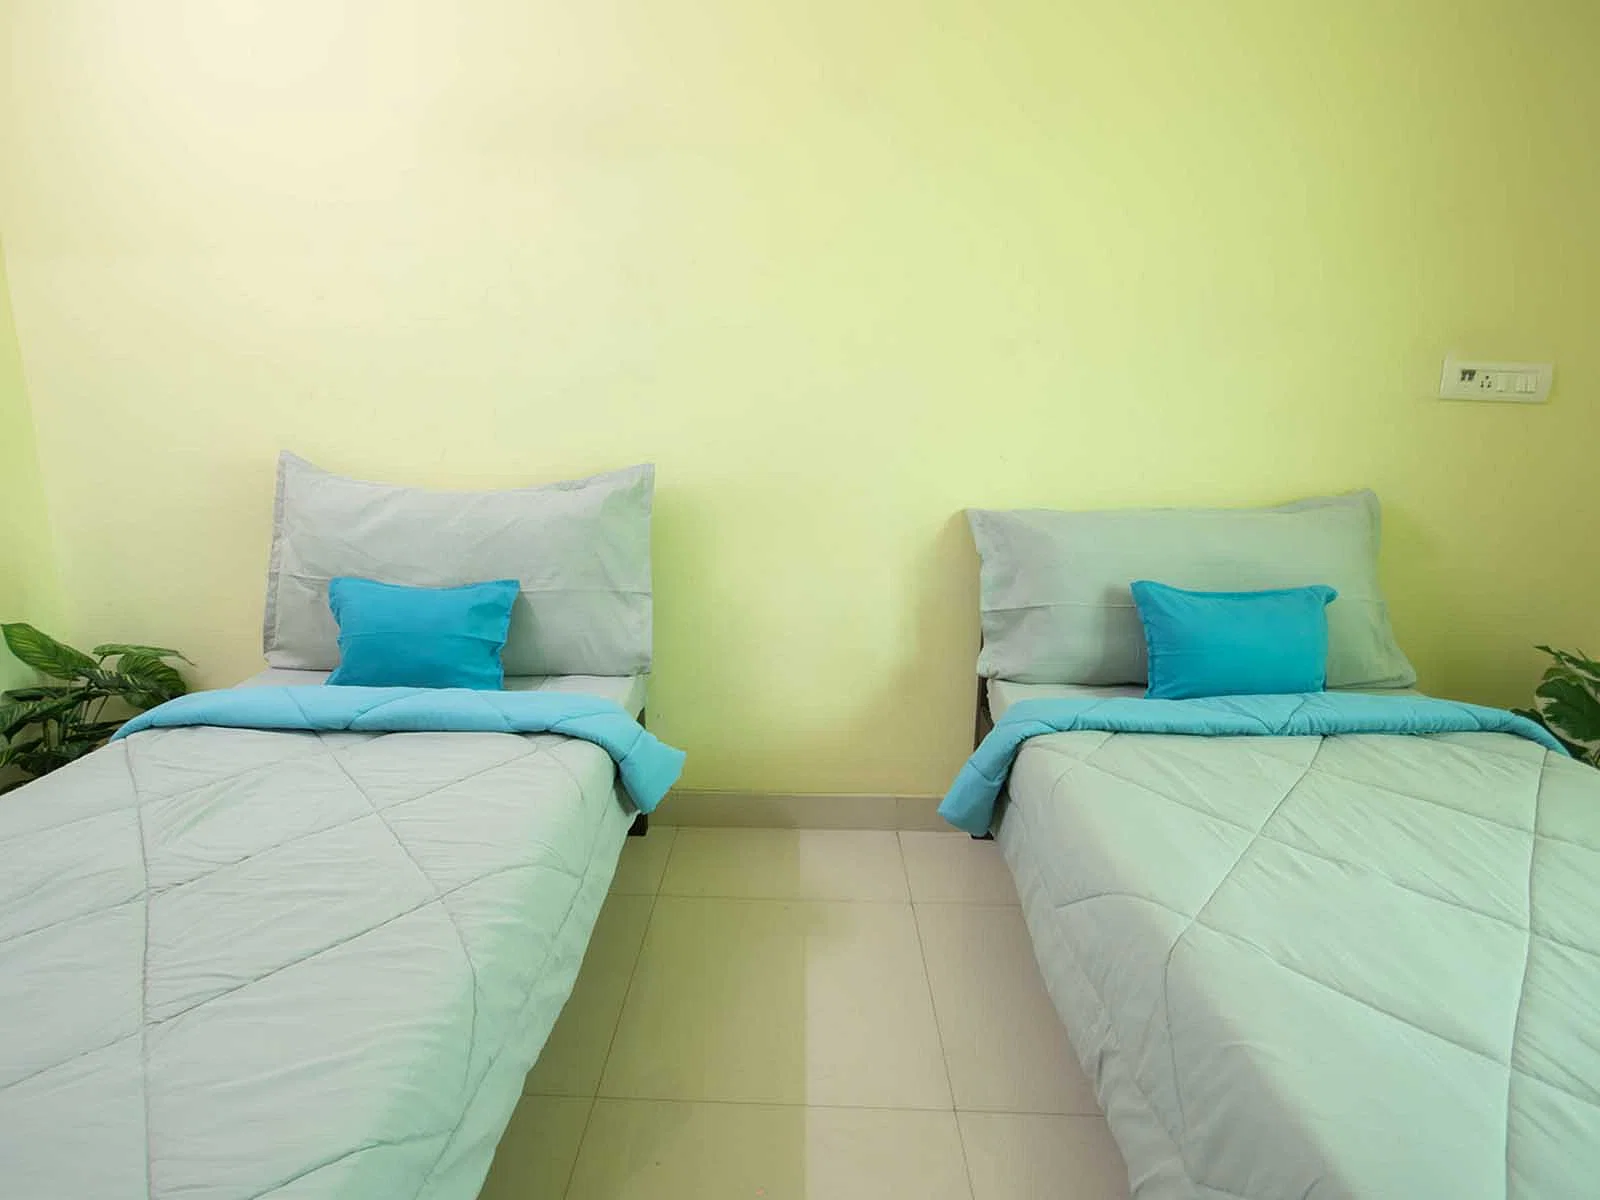 budget-friendly PGs and hostels for gents with single rooms with daily hopusekeeping-Zolo Cruze